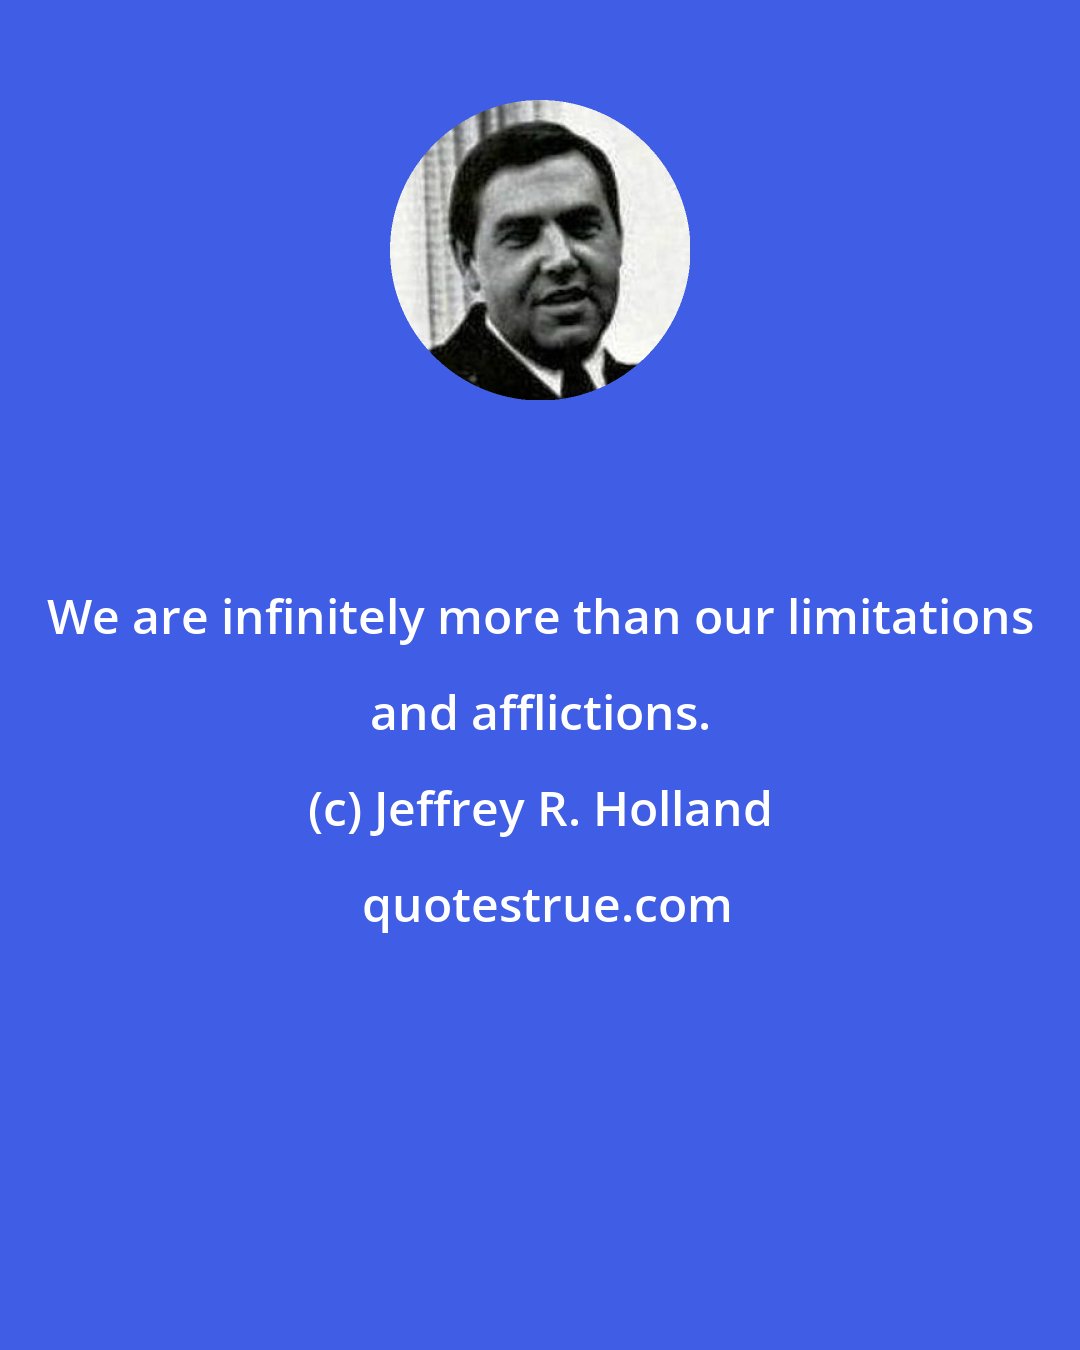 Jeffrey R. Holland: We are infinitely more than our limitations and afflictions.